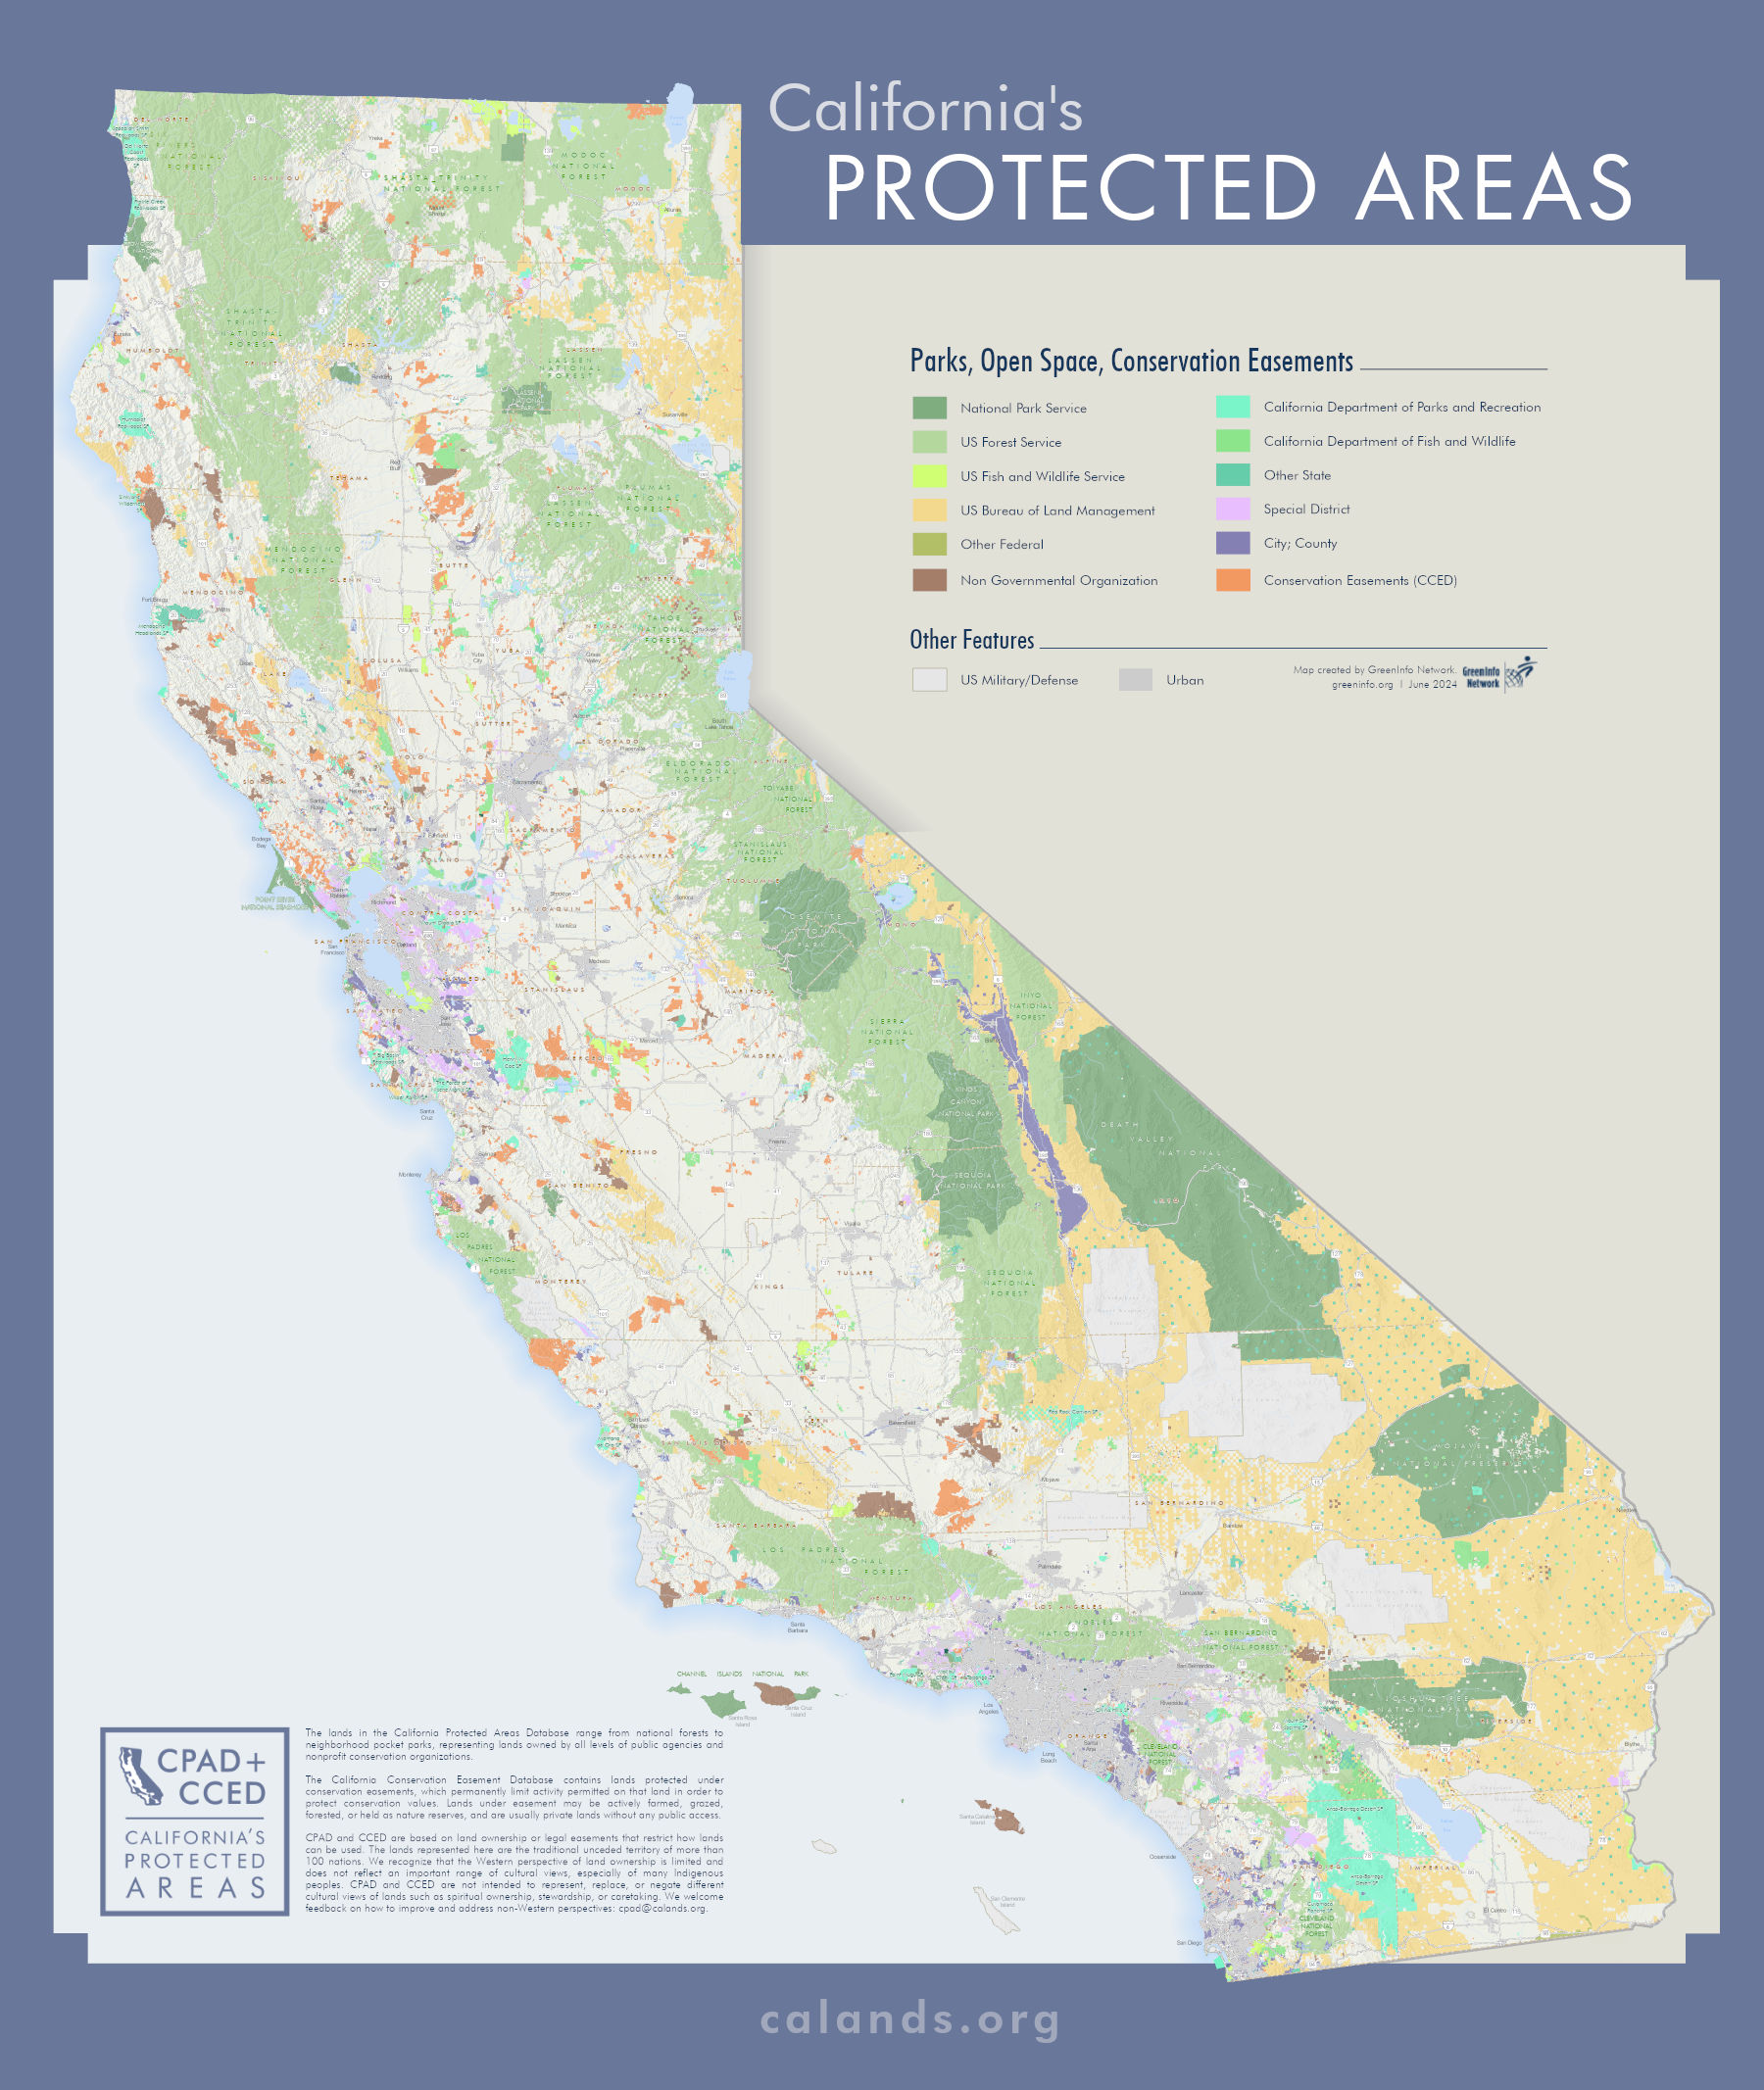 A thumbnail of a poster map of the California Protected Areas.